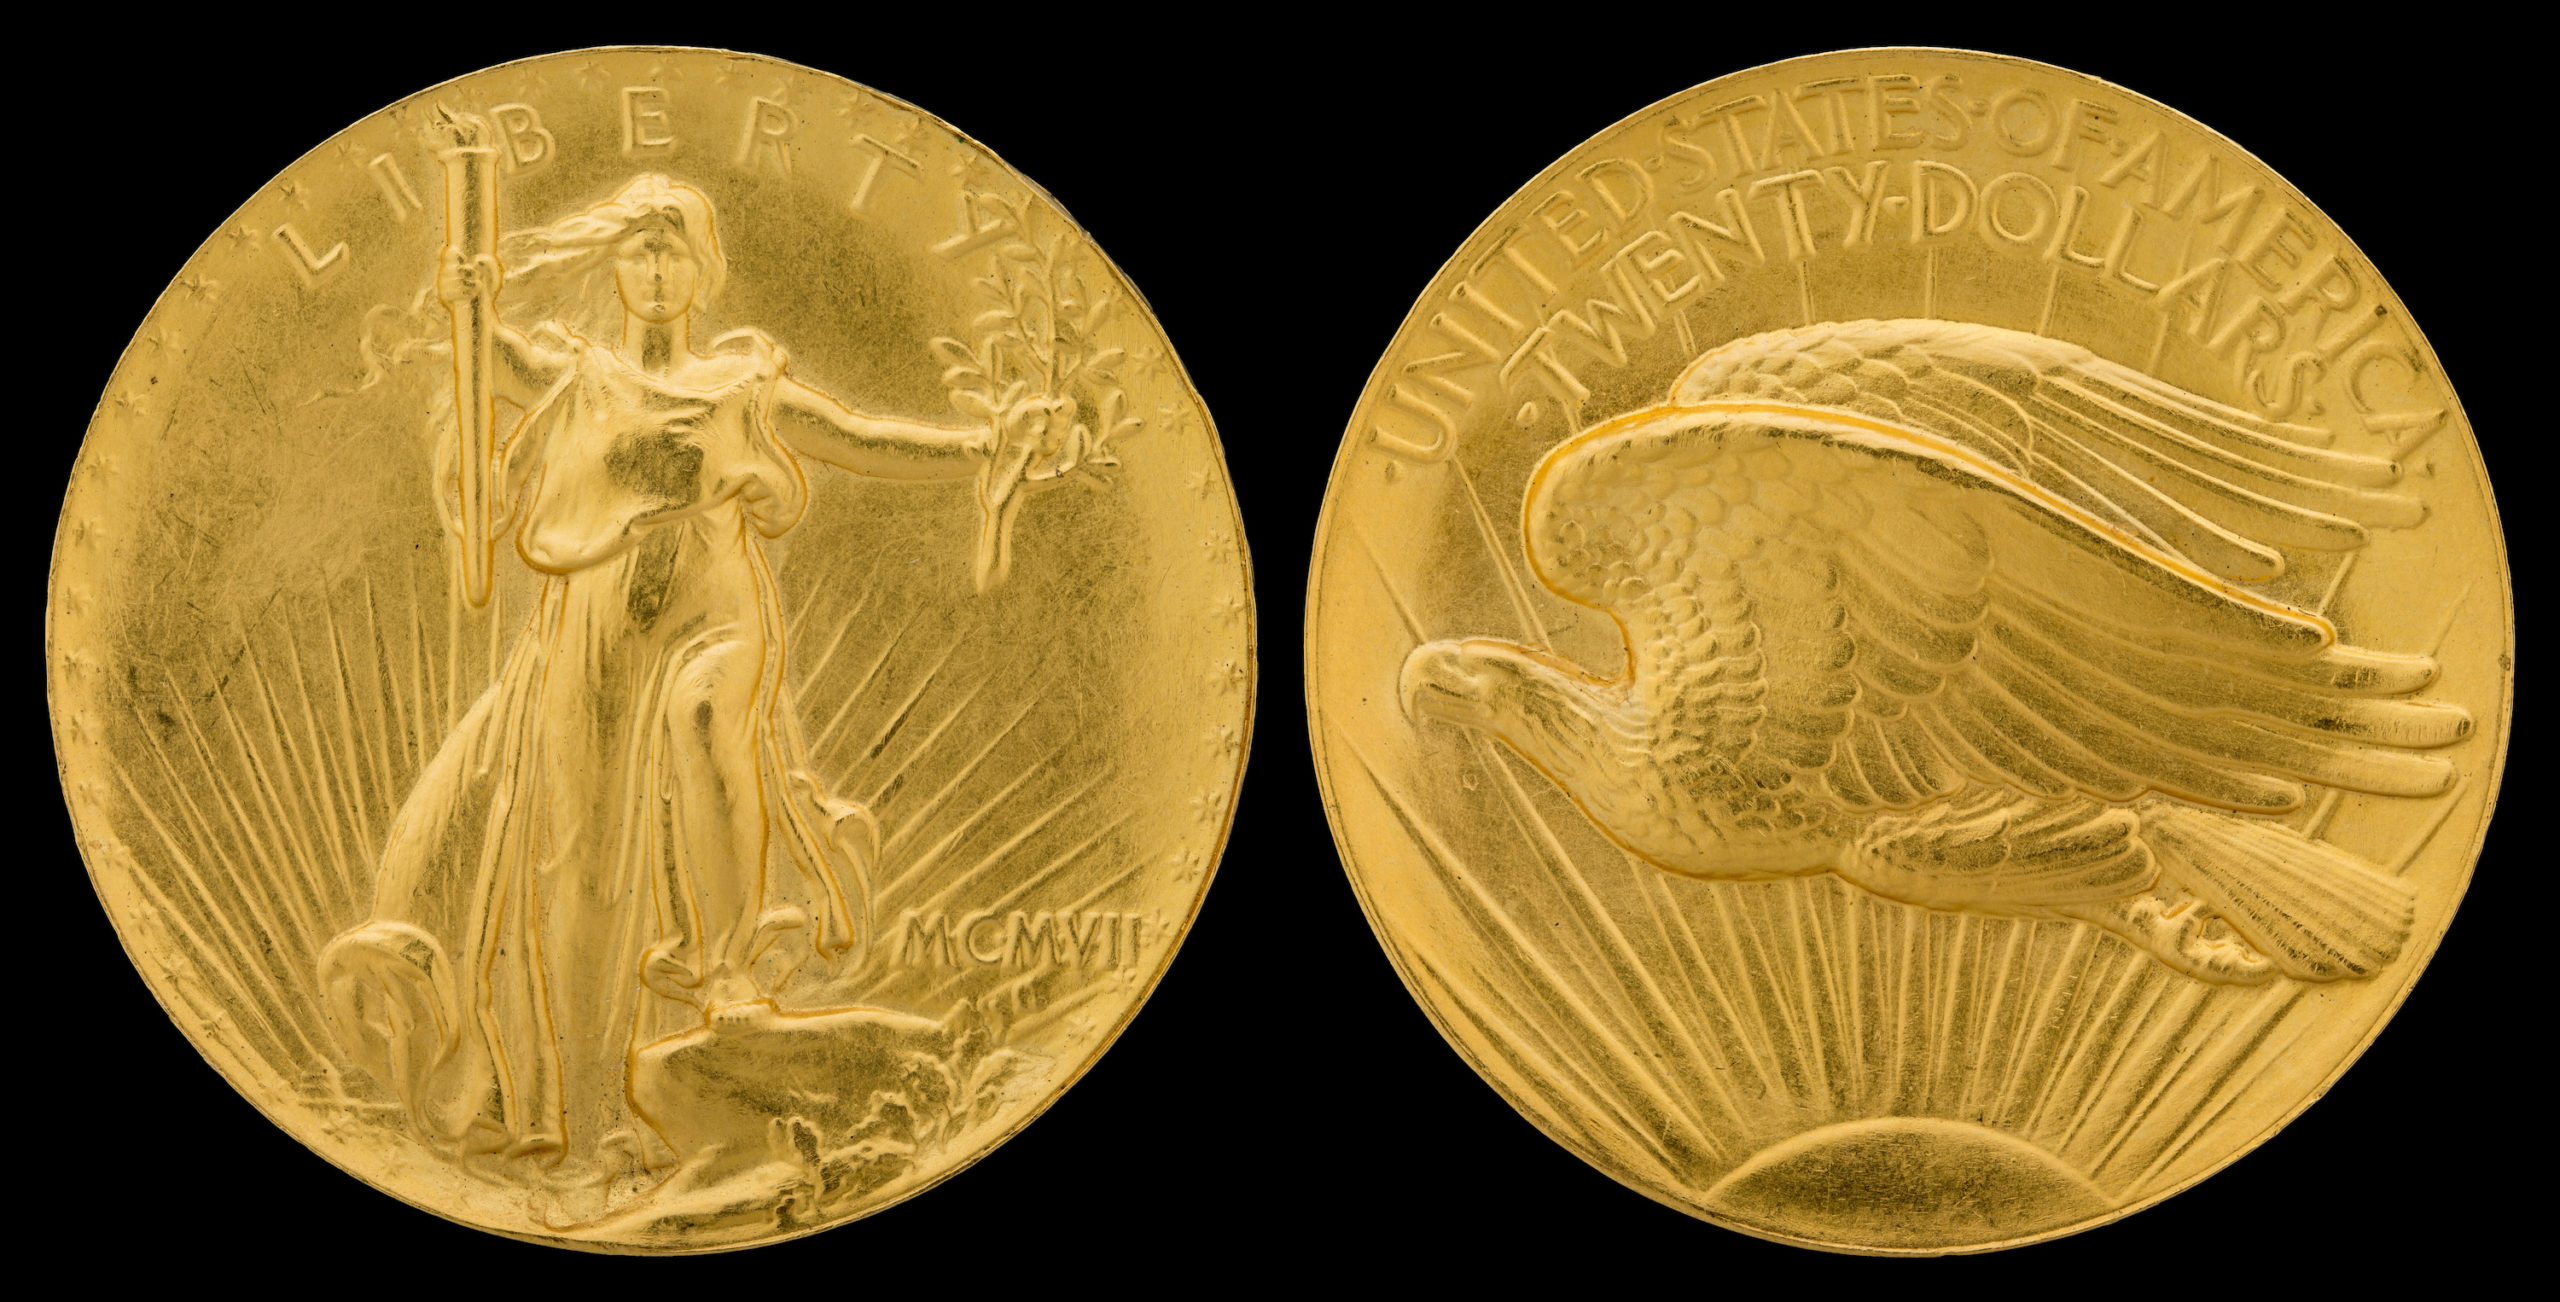 Photo of Obverse and reverse of US $20 double eagle gold coin